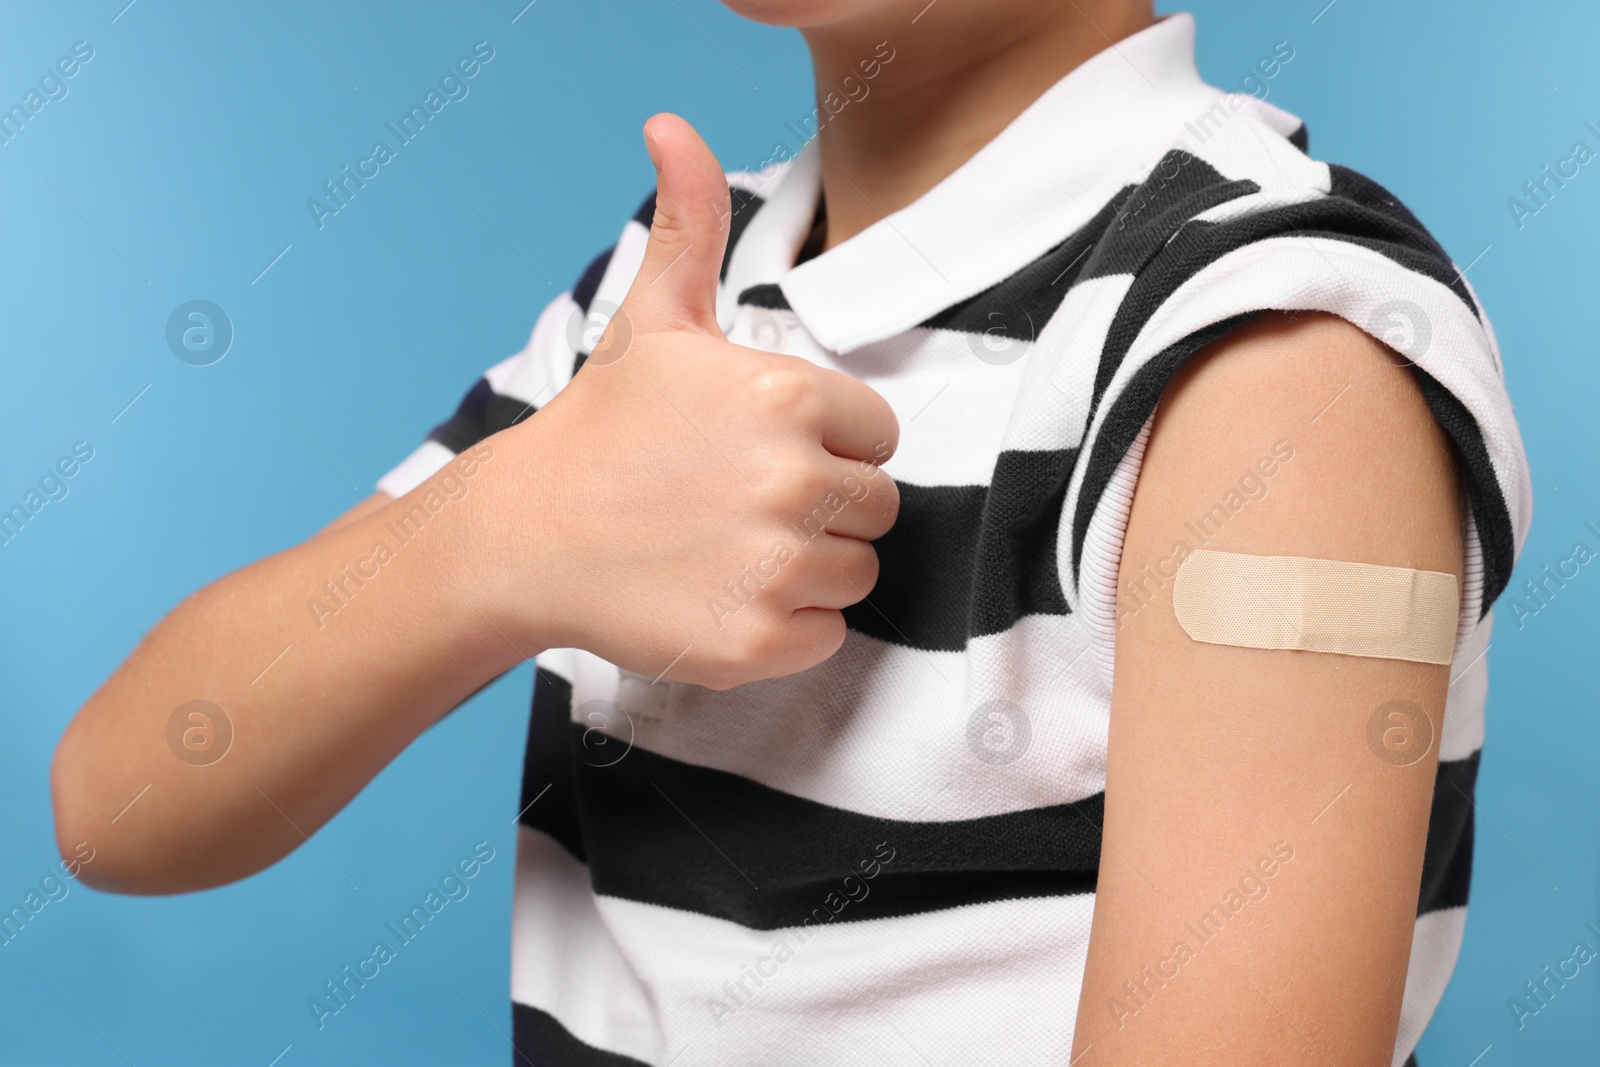 Photo of Boy with sticking plaster on arm after vaccination showing thumbs up against light blue background, closeup